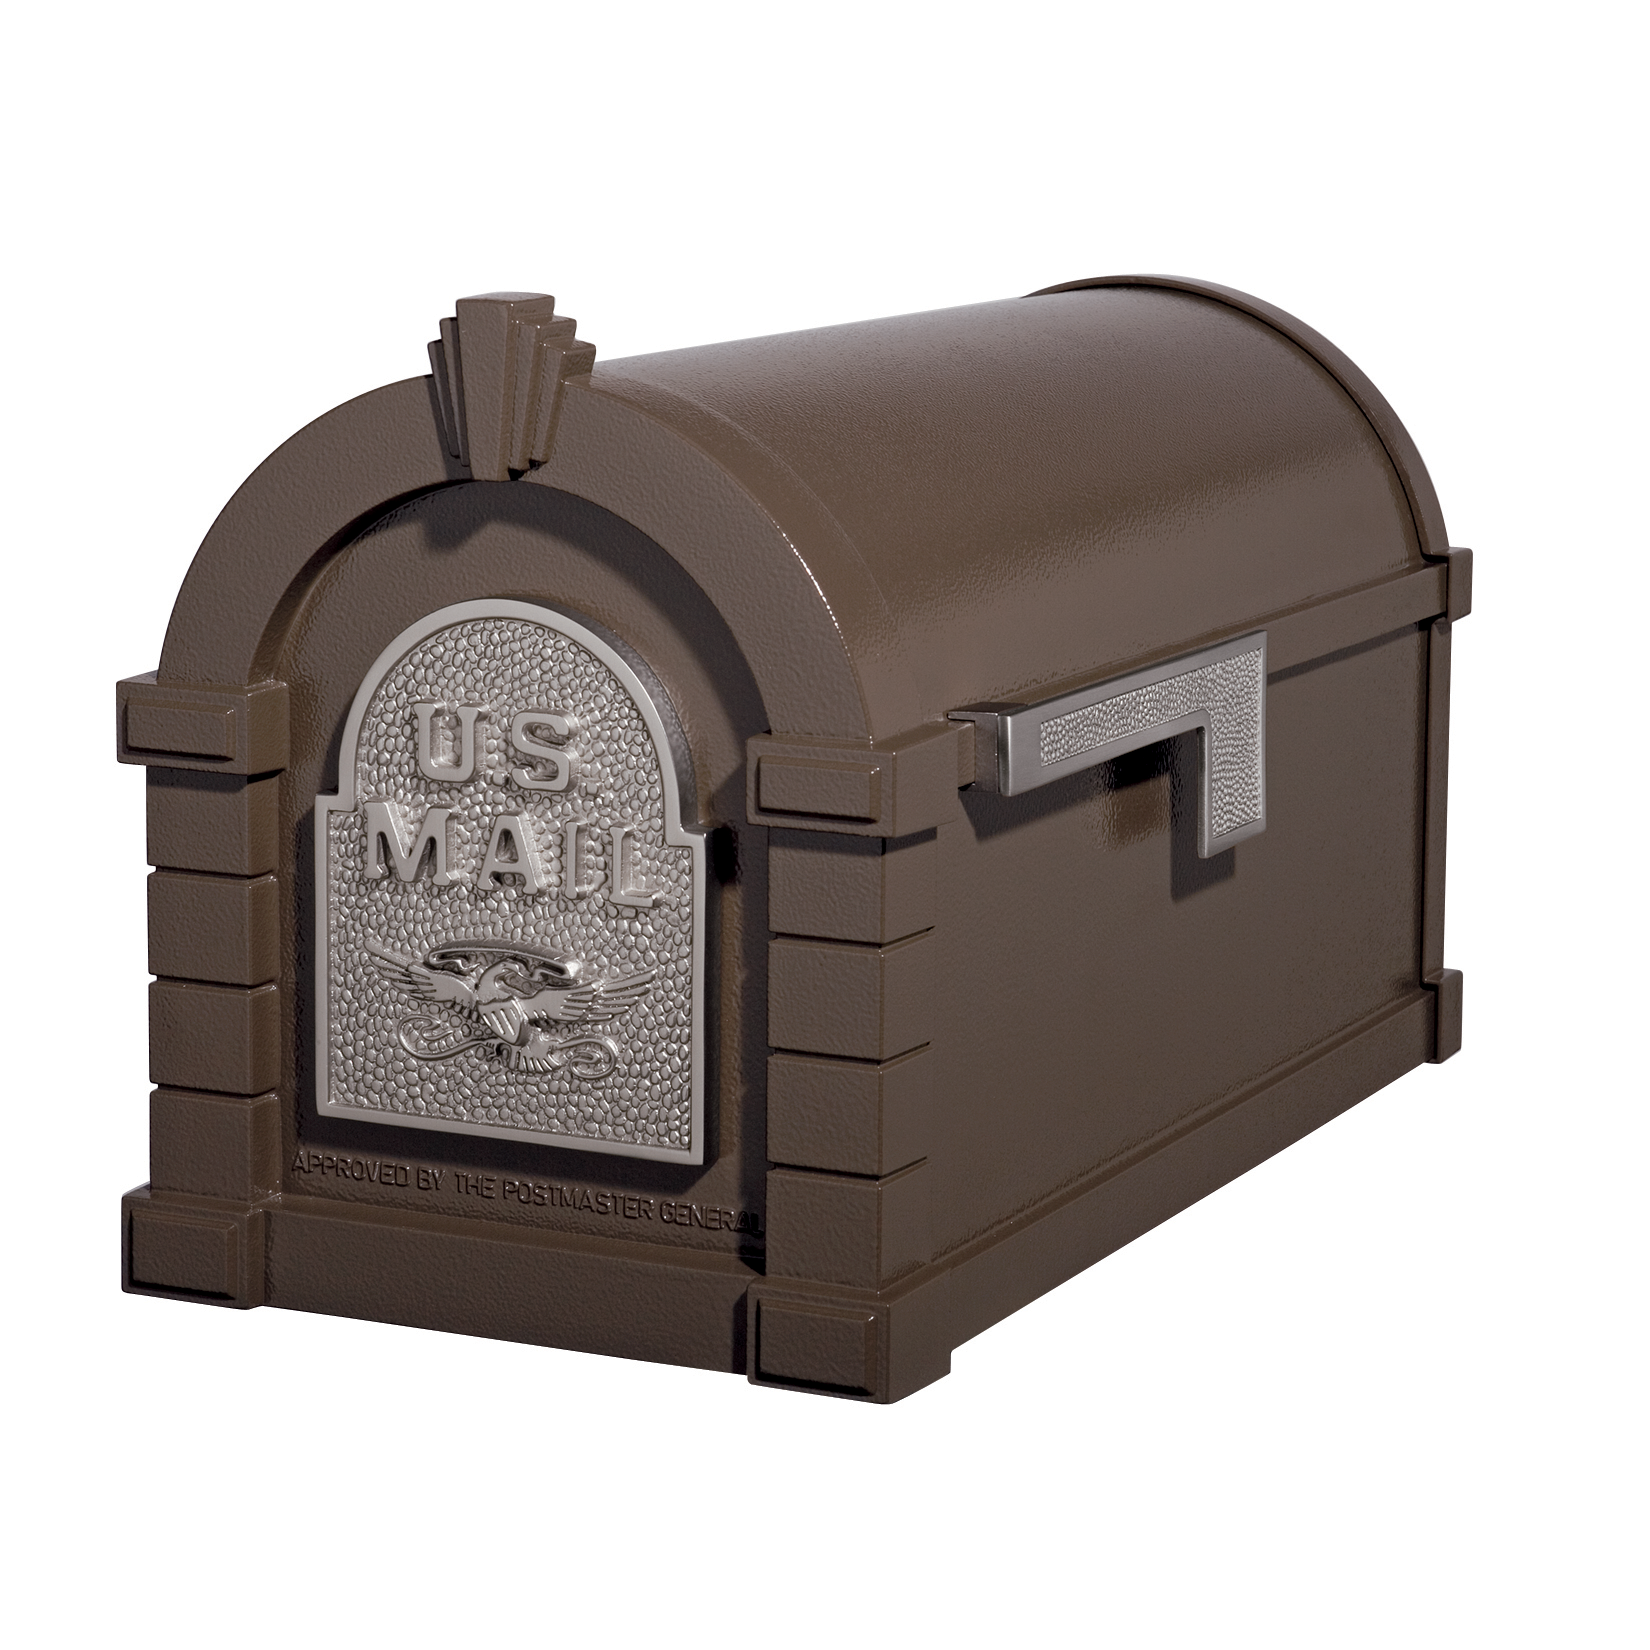 Gaines Eagle Keystone Mailboxes - Bronze with Satin Nickel